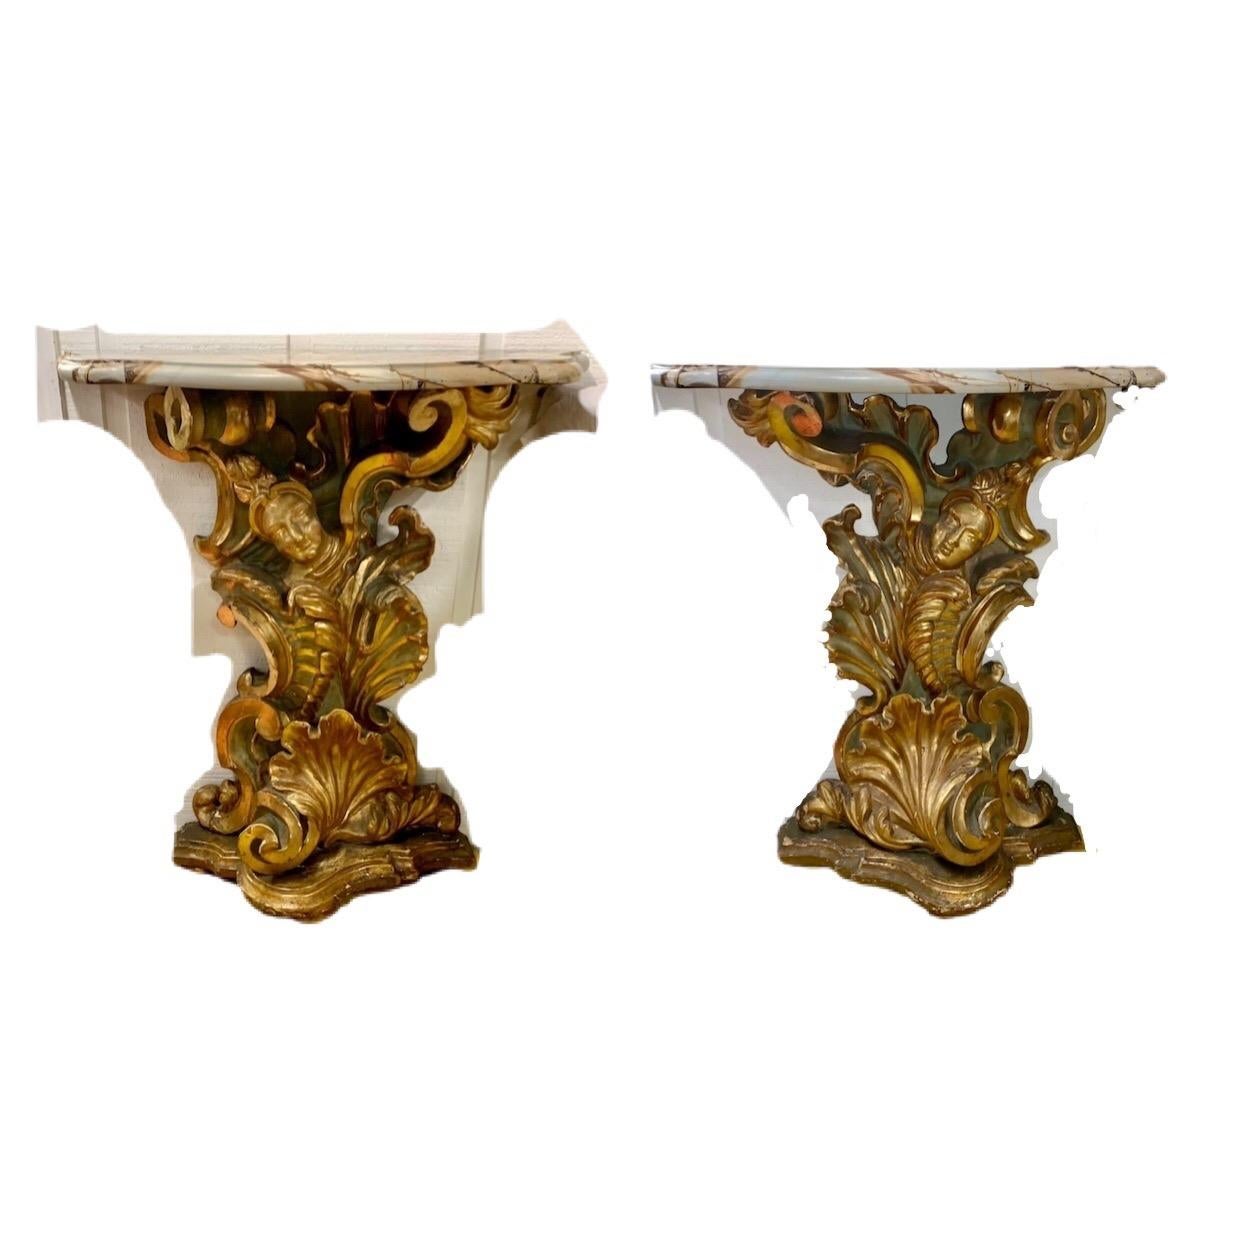 Baroque Pair of 18th Century Italian Painted & Gilt Carved Wood Consoles